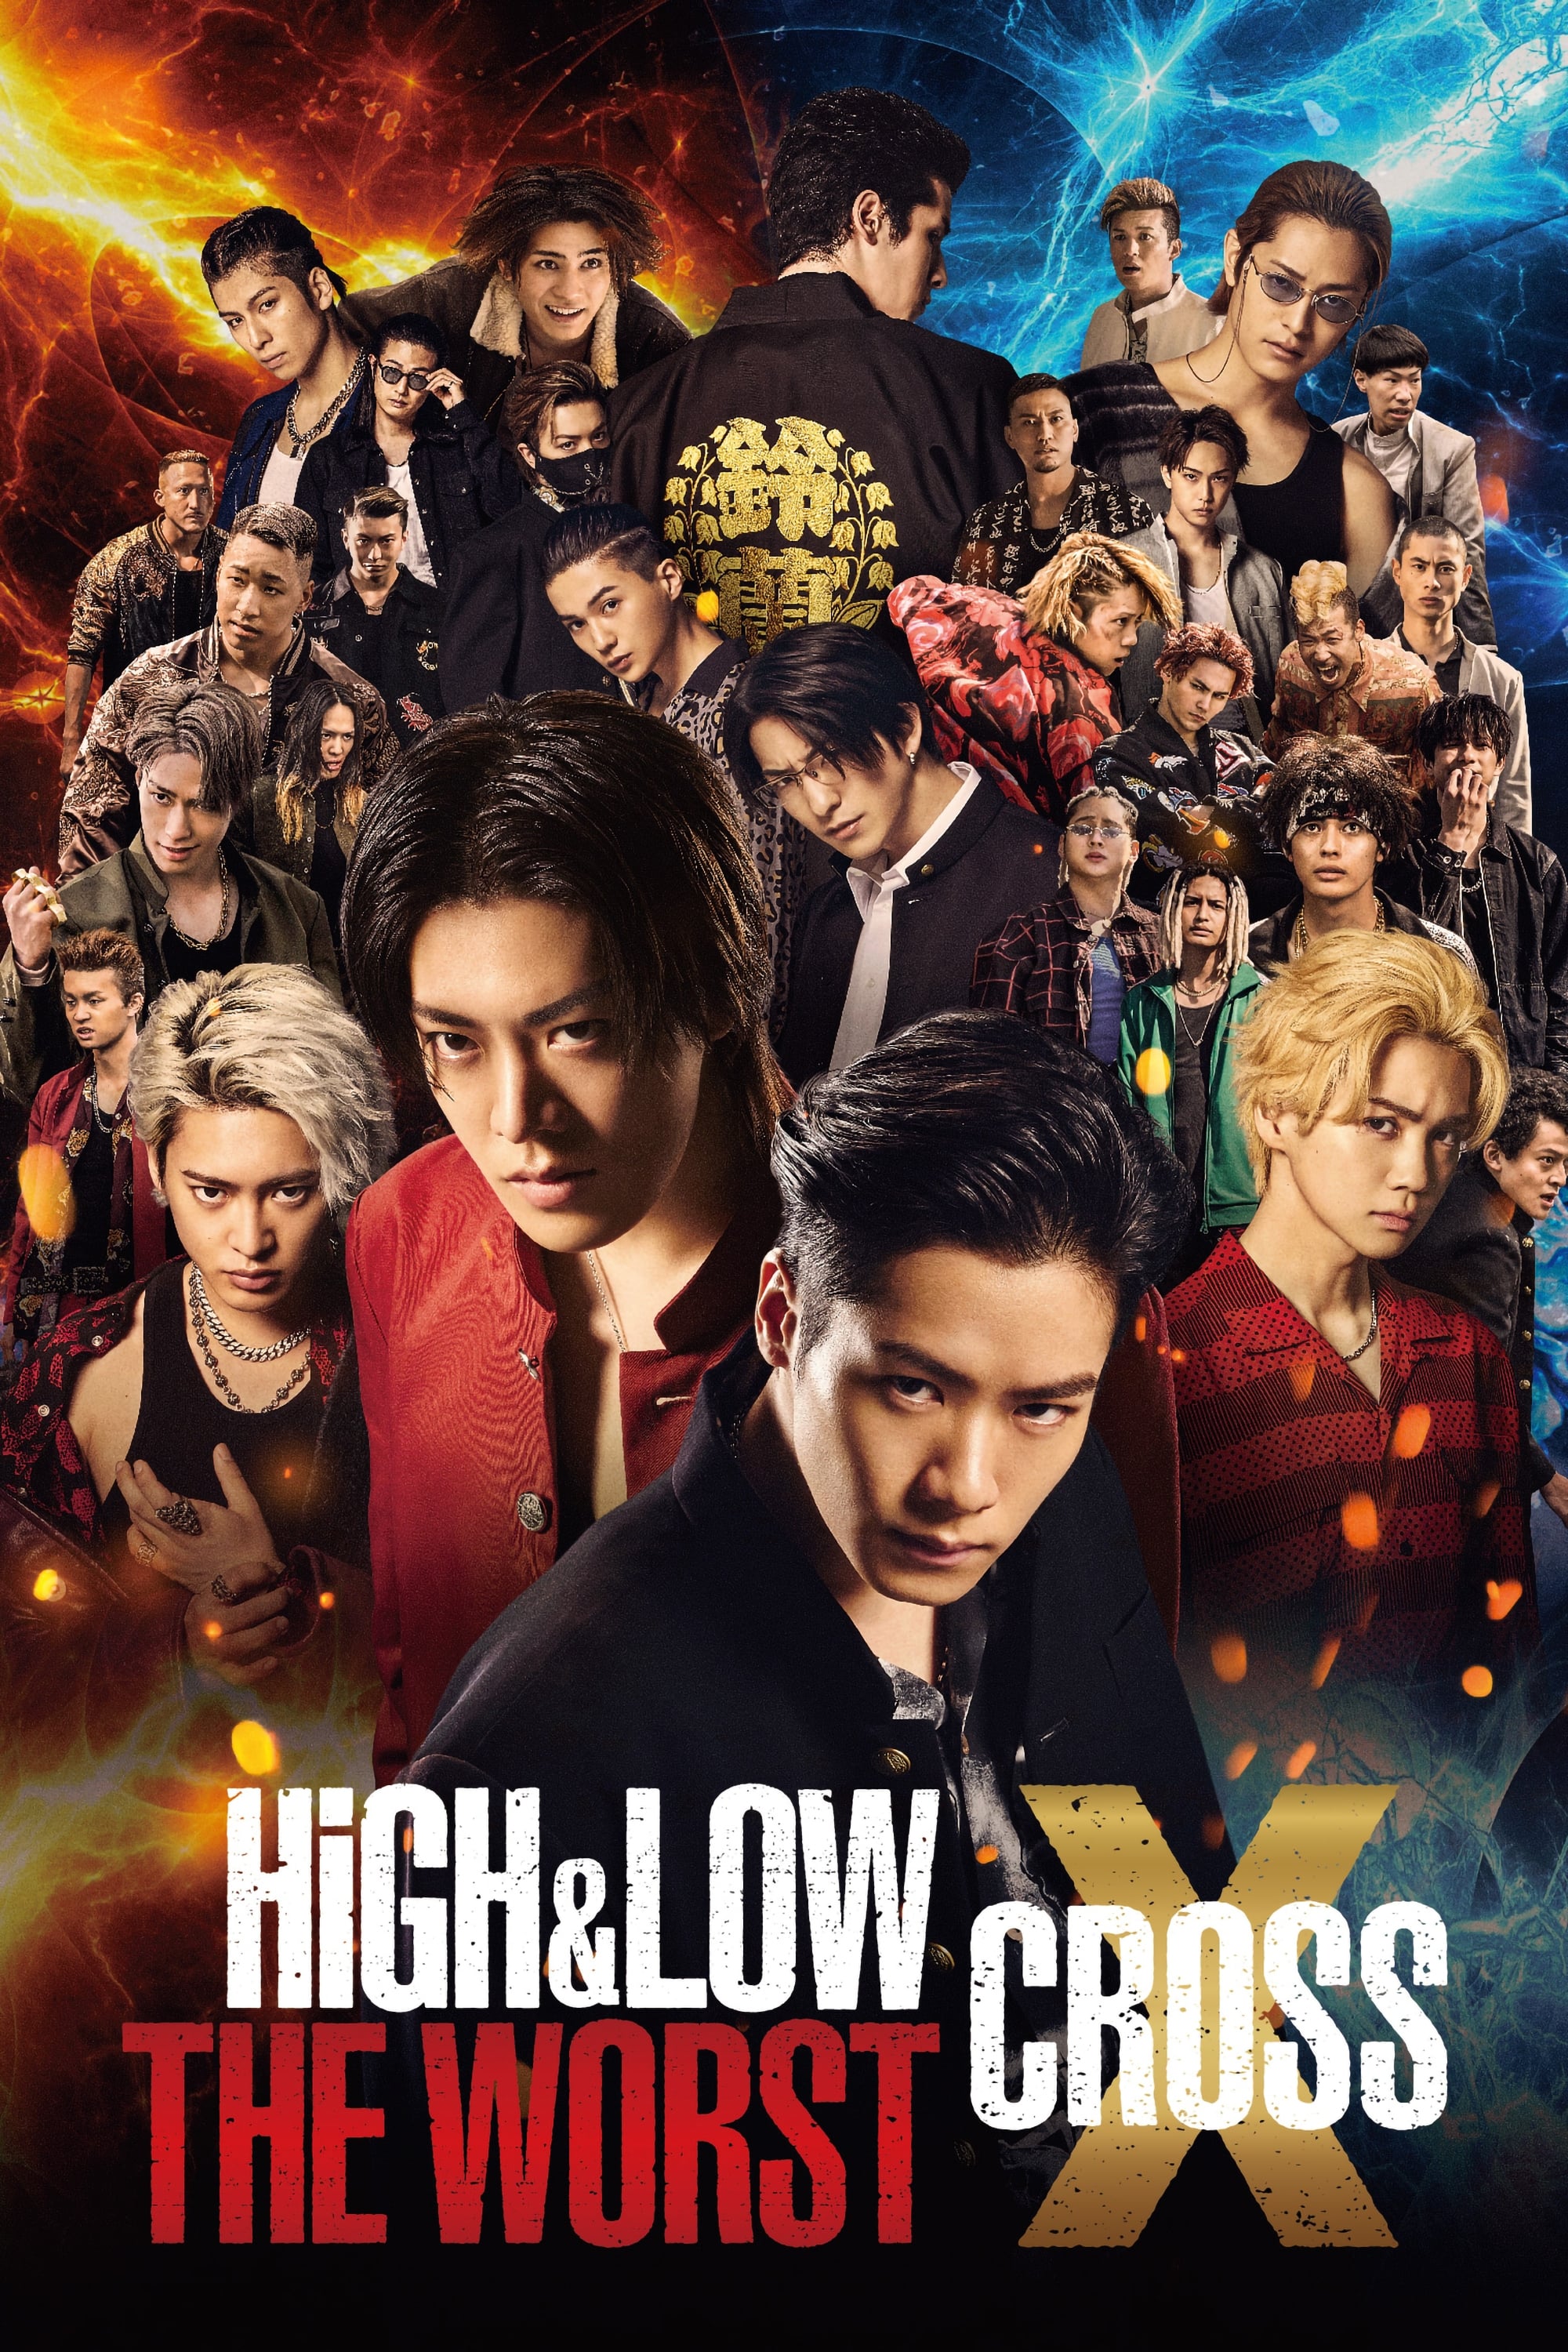 Trailer Du Film High And Low The Worst X High And Low The Worst X Bande Annonce Vo Cinésérie 8484